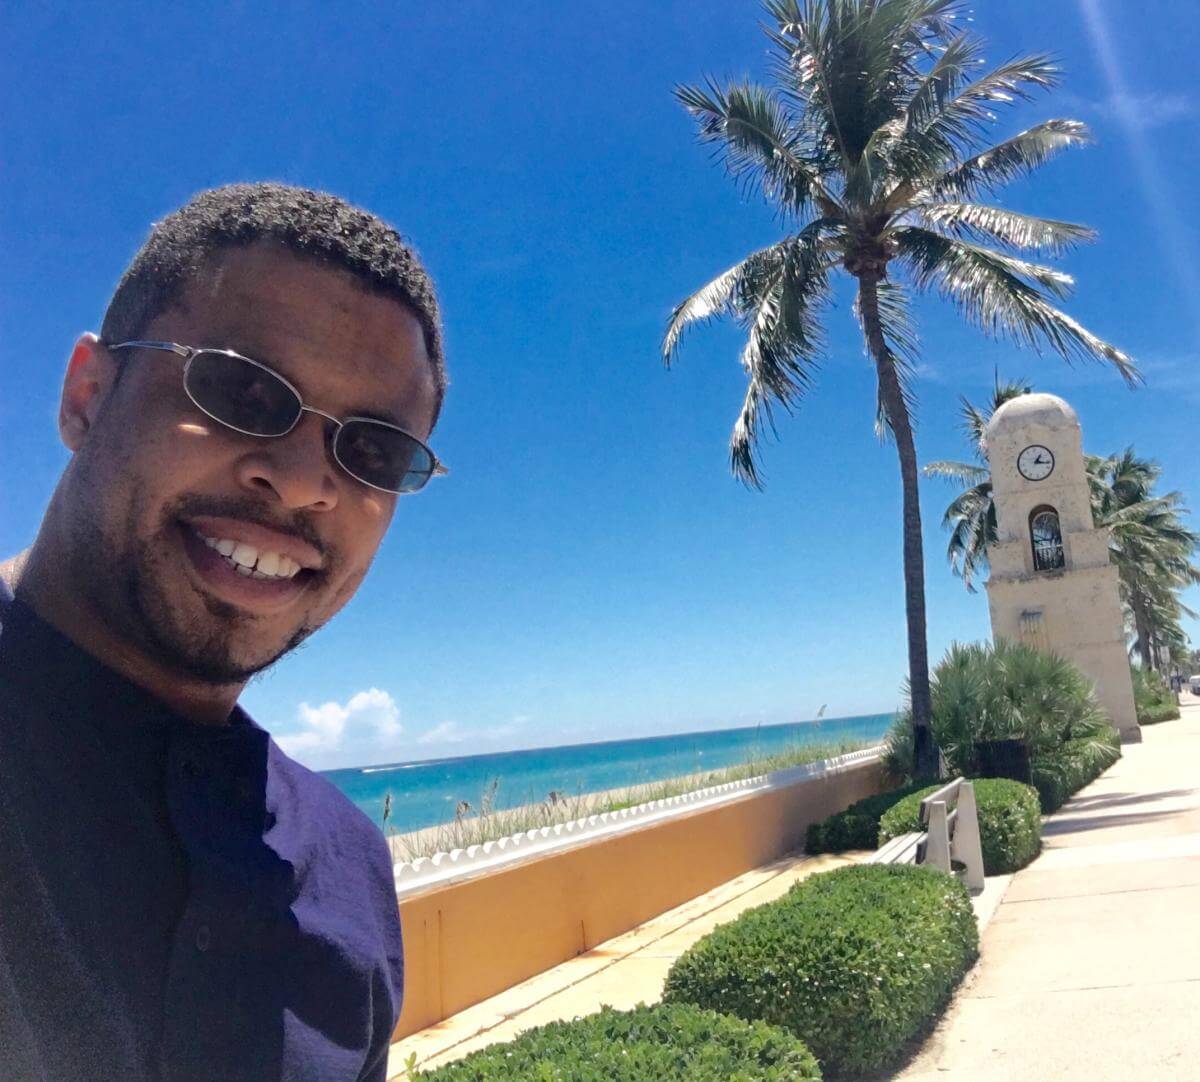 A young man in sunglasses takes a smiling selfie in front of the Worth Avenue clock tower